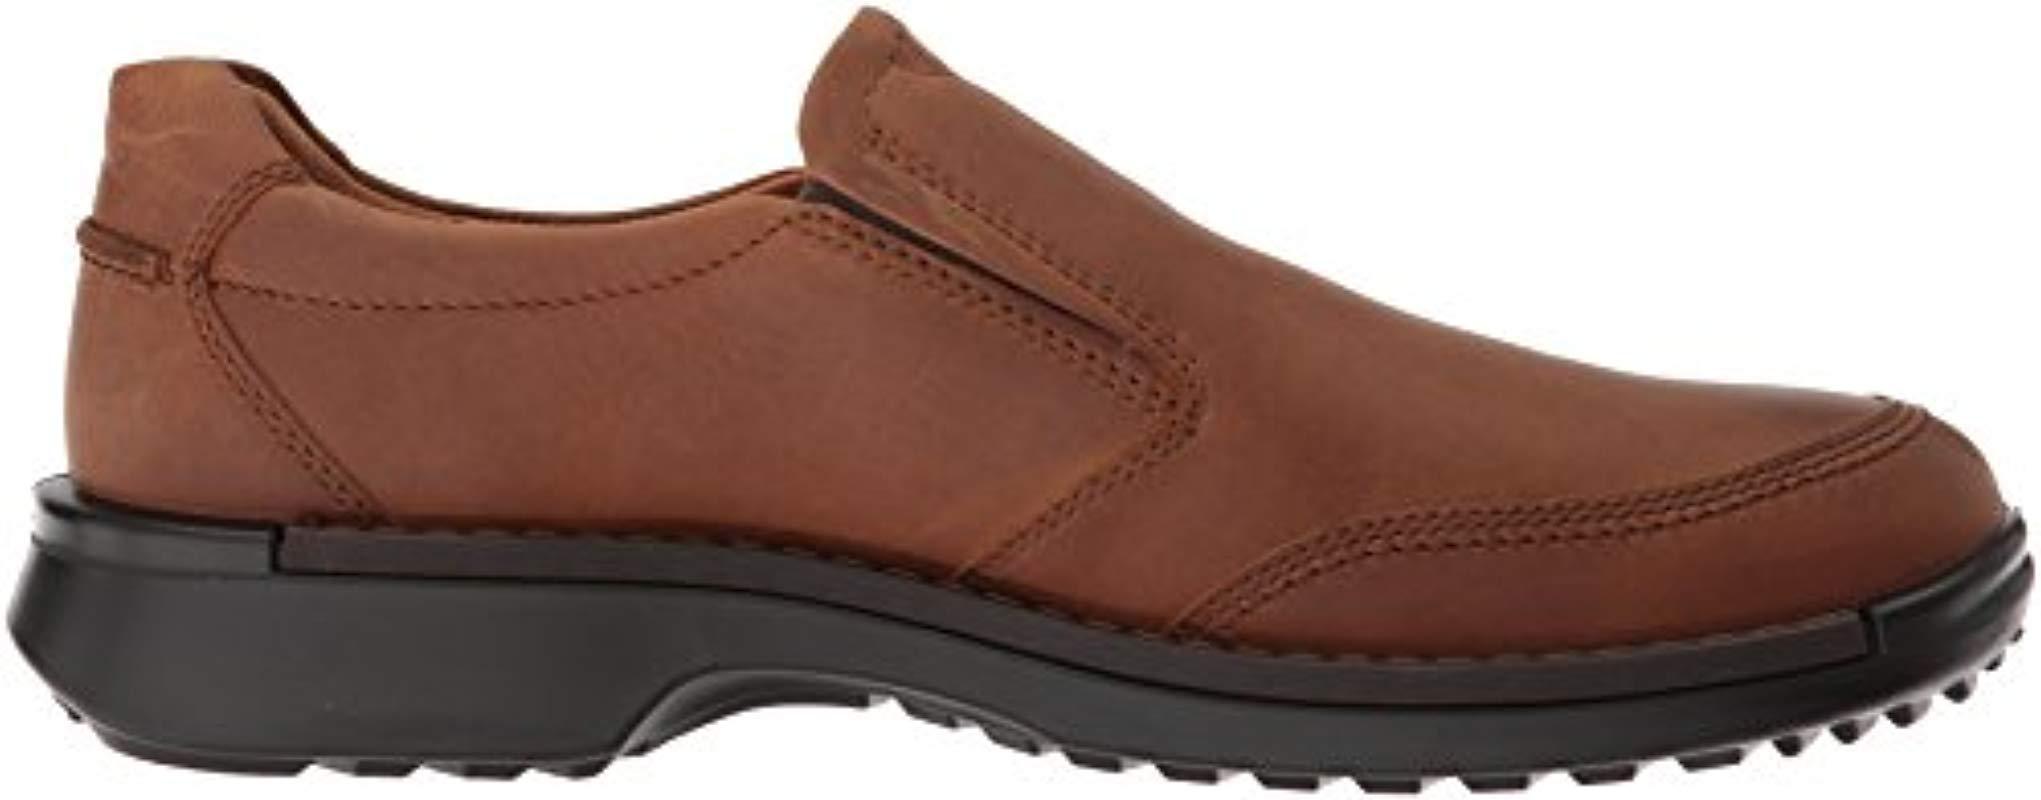 Ecco Leather Fusion Ii Slip On Slip-on Loafer in Brown for Men - Lyst